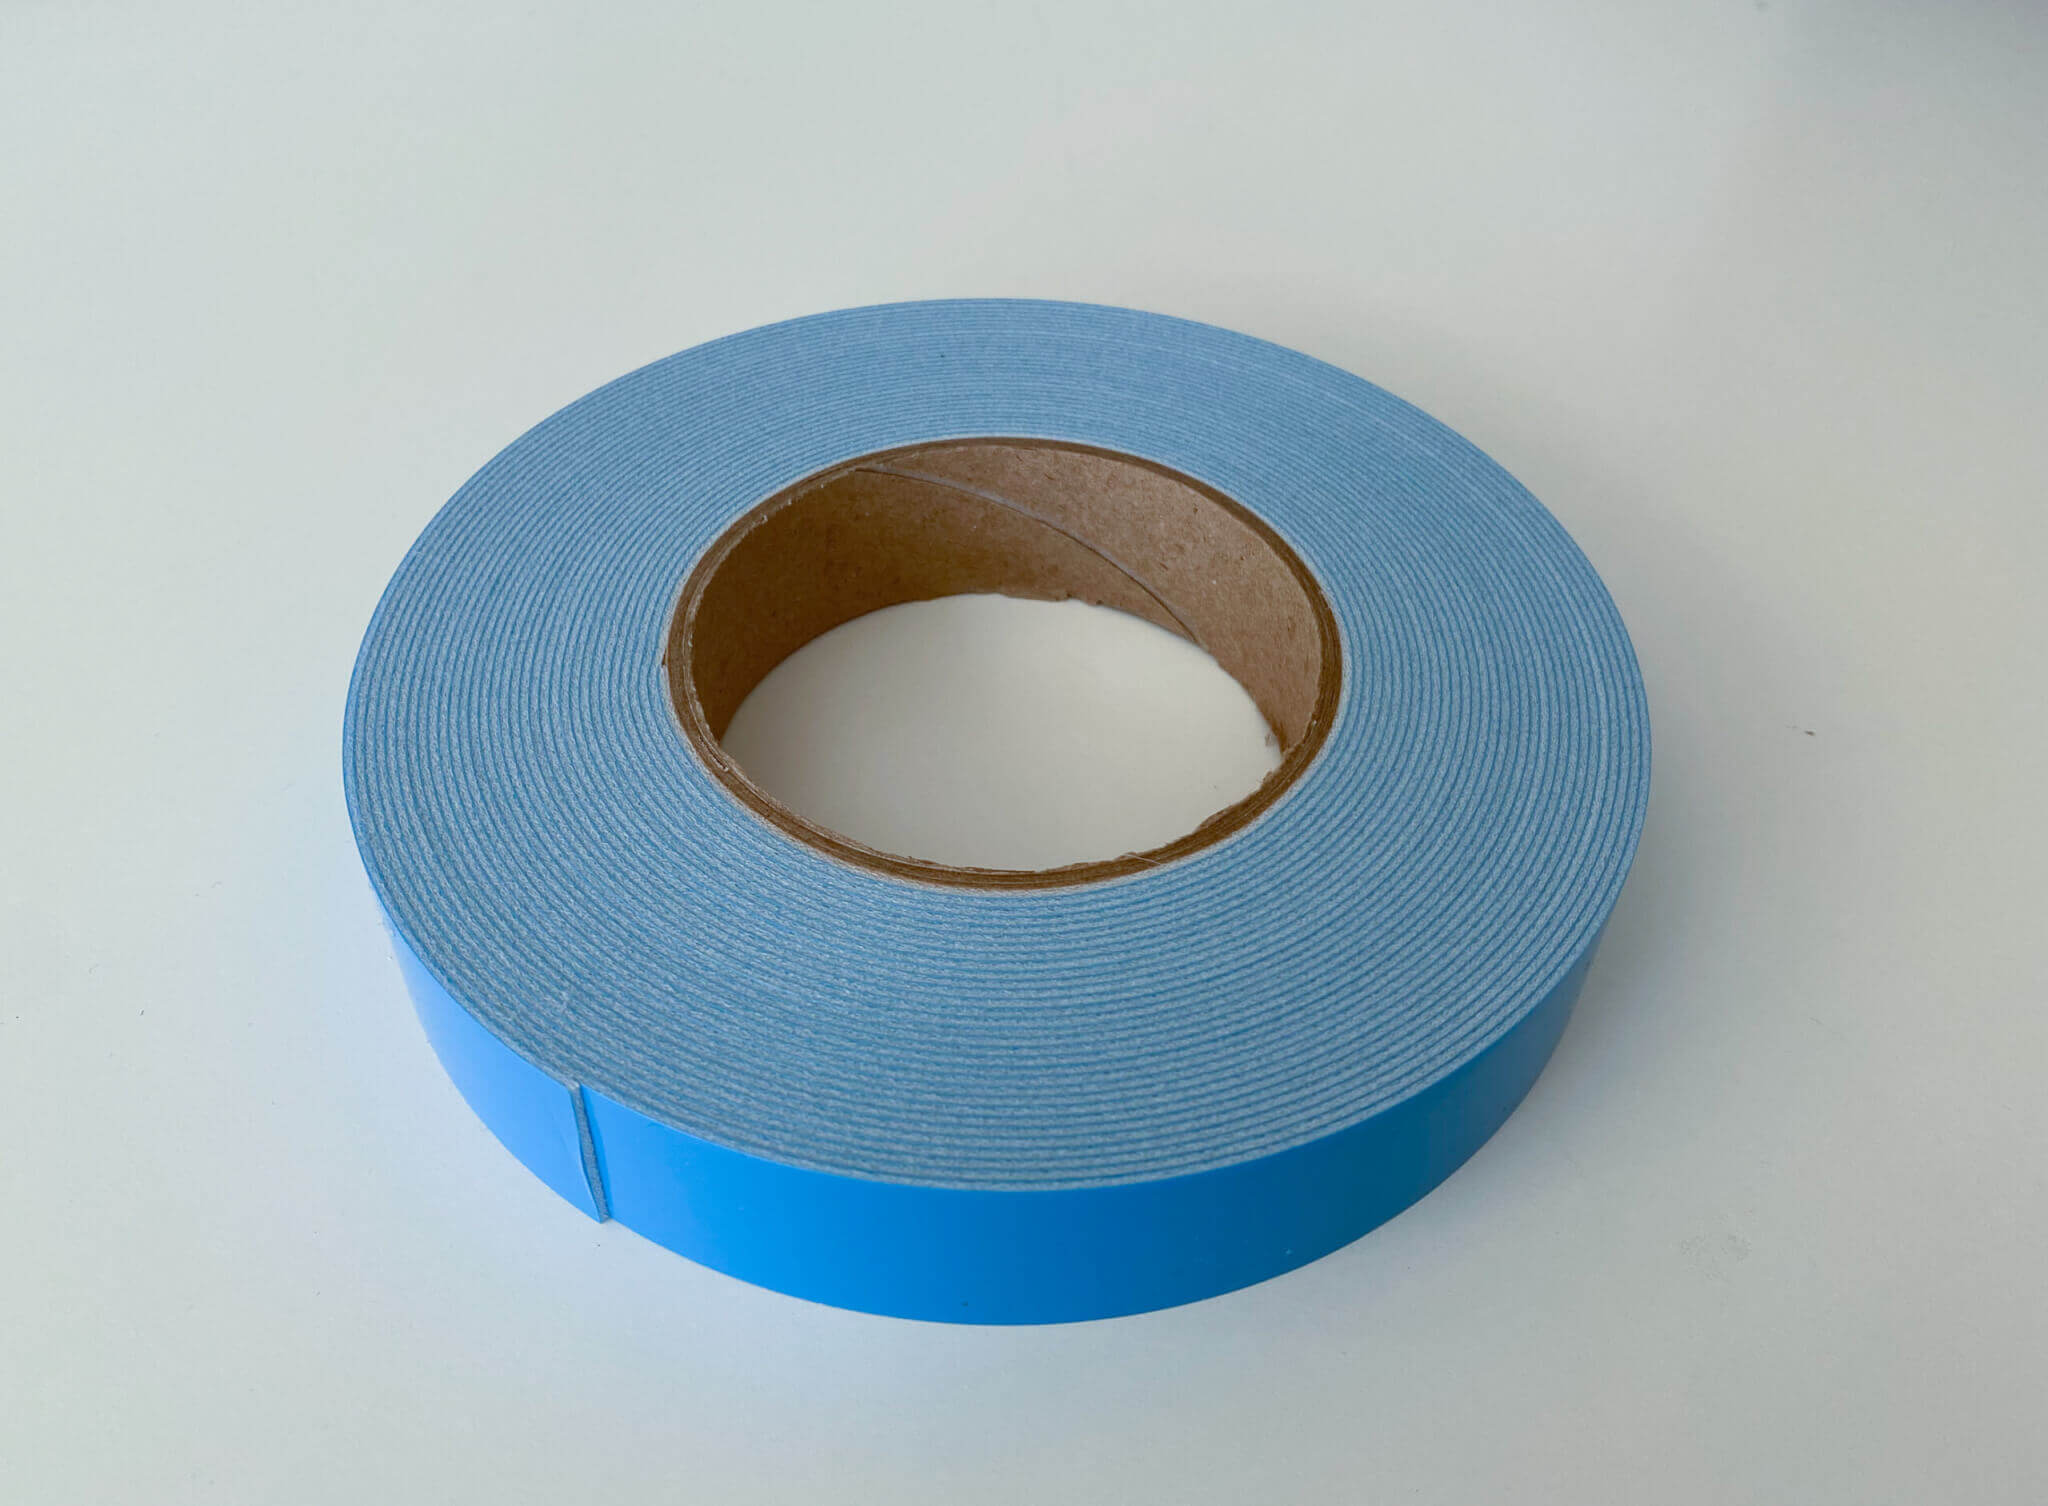 https://www.68travel.com/wp-content/uploads/2021/03/68travel-double-sided-tape-1-scaled.jpg